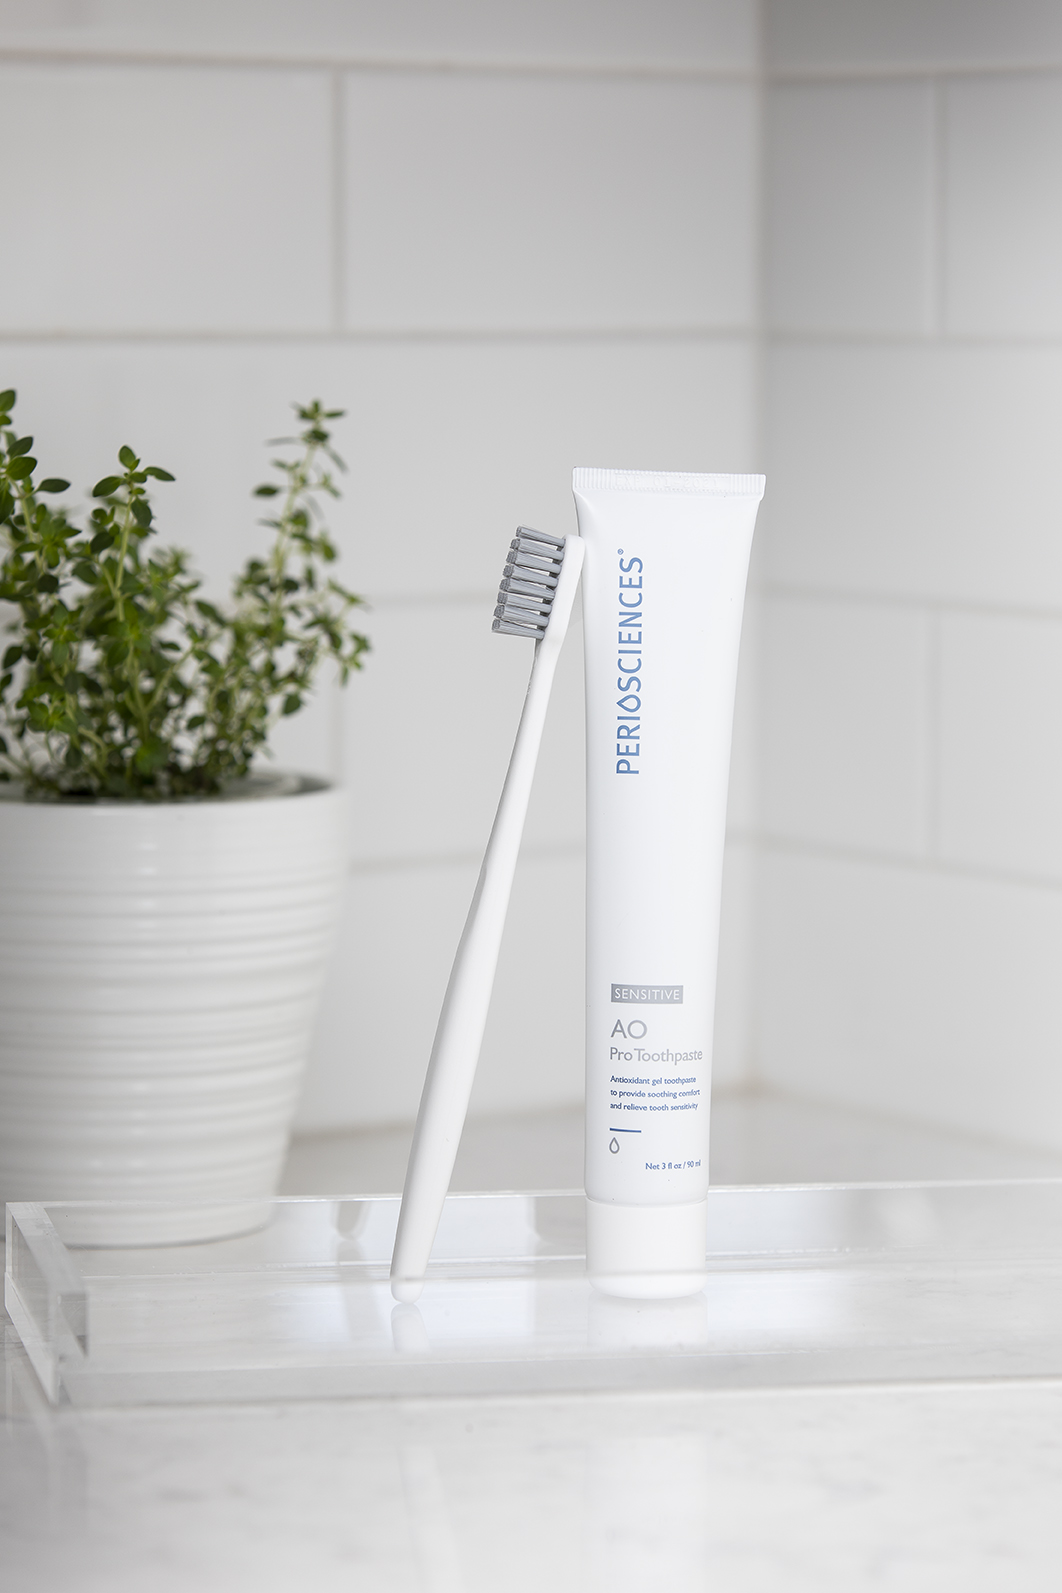 Brand Identity and Strategy - Toothpaste Brand